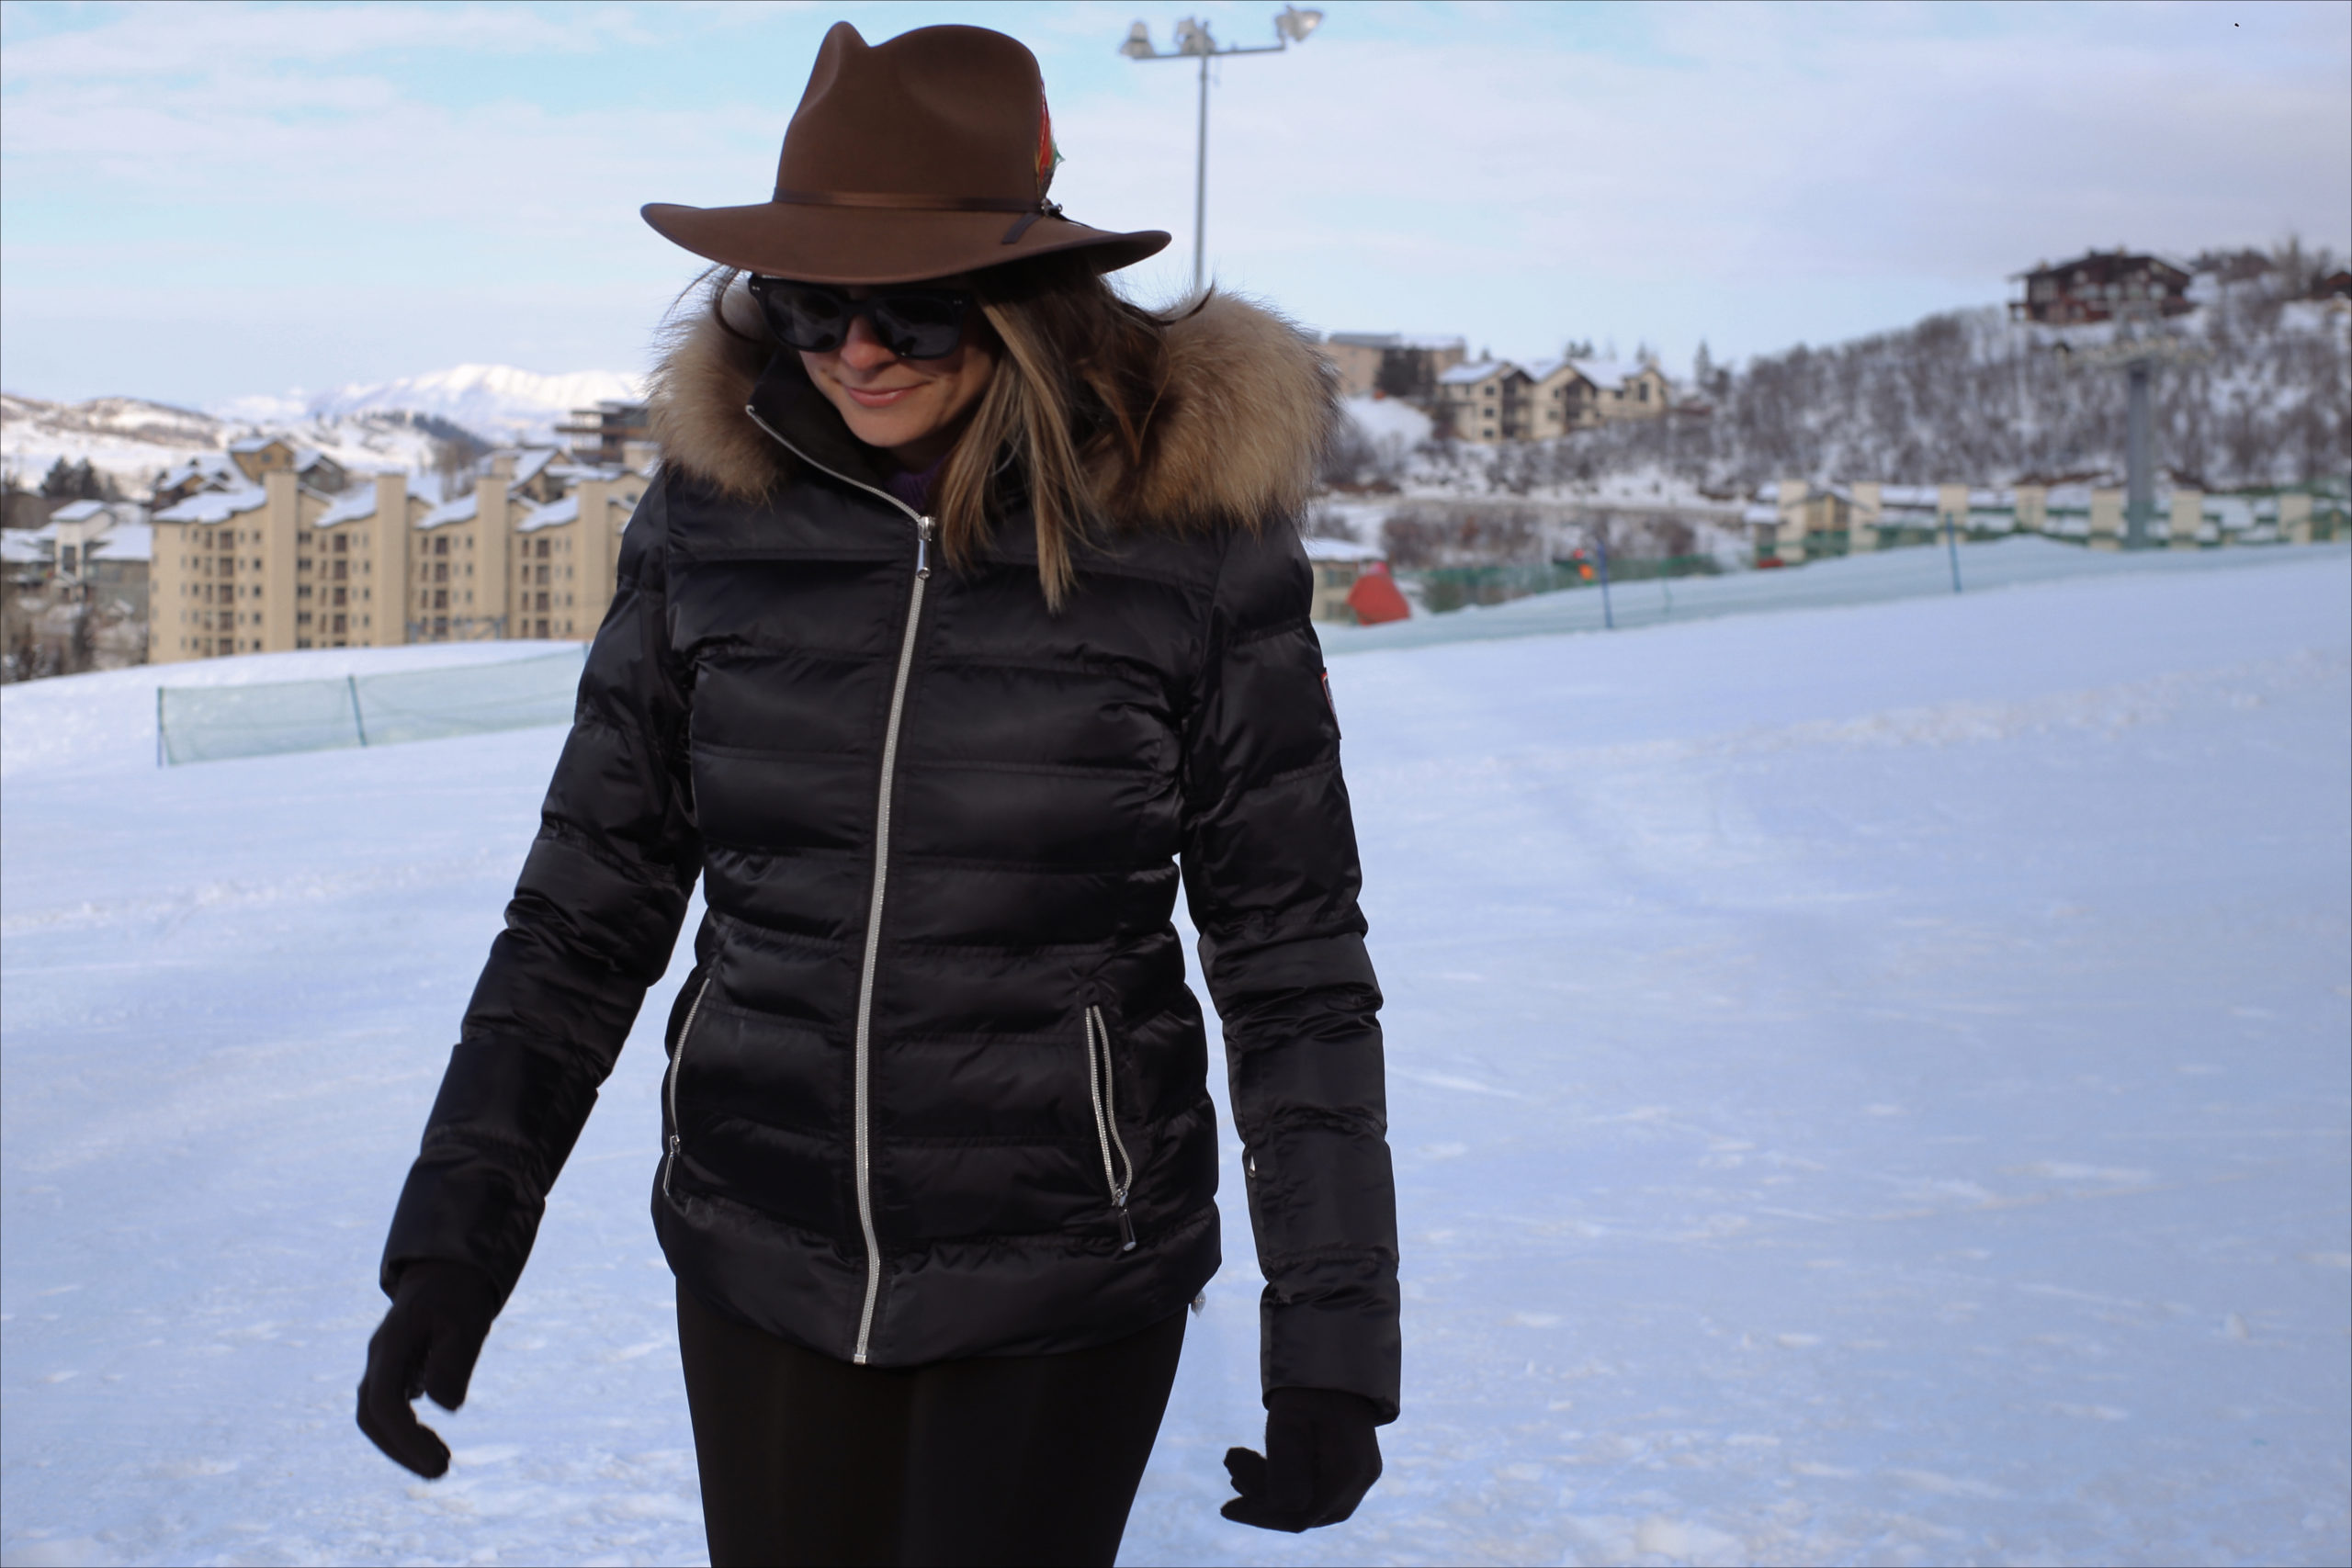 Travel Diary: Steamboat Springs, Colorado